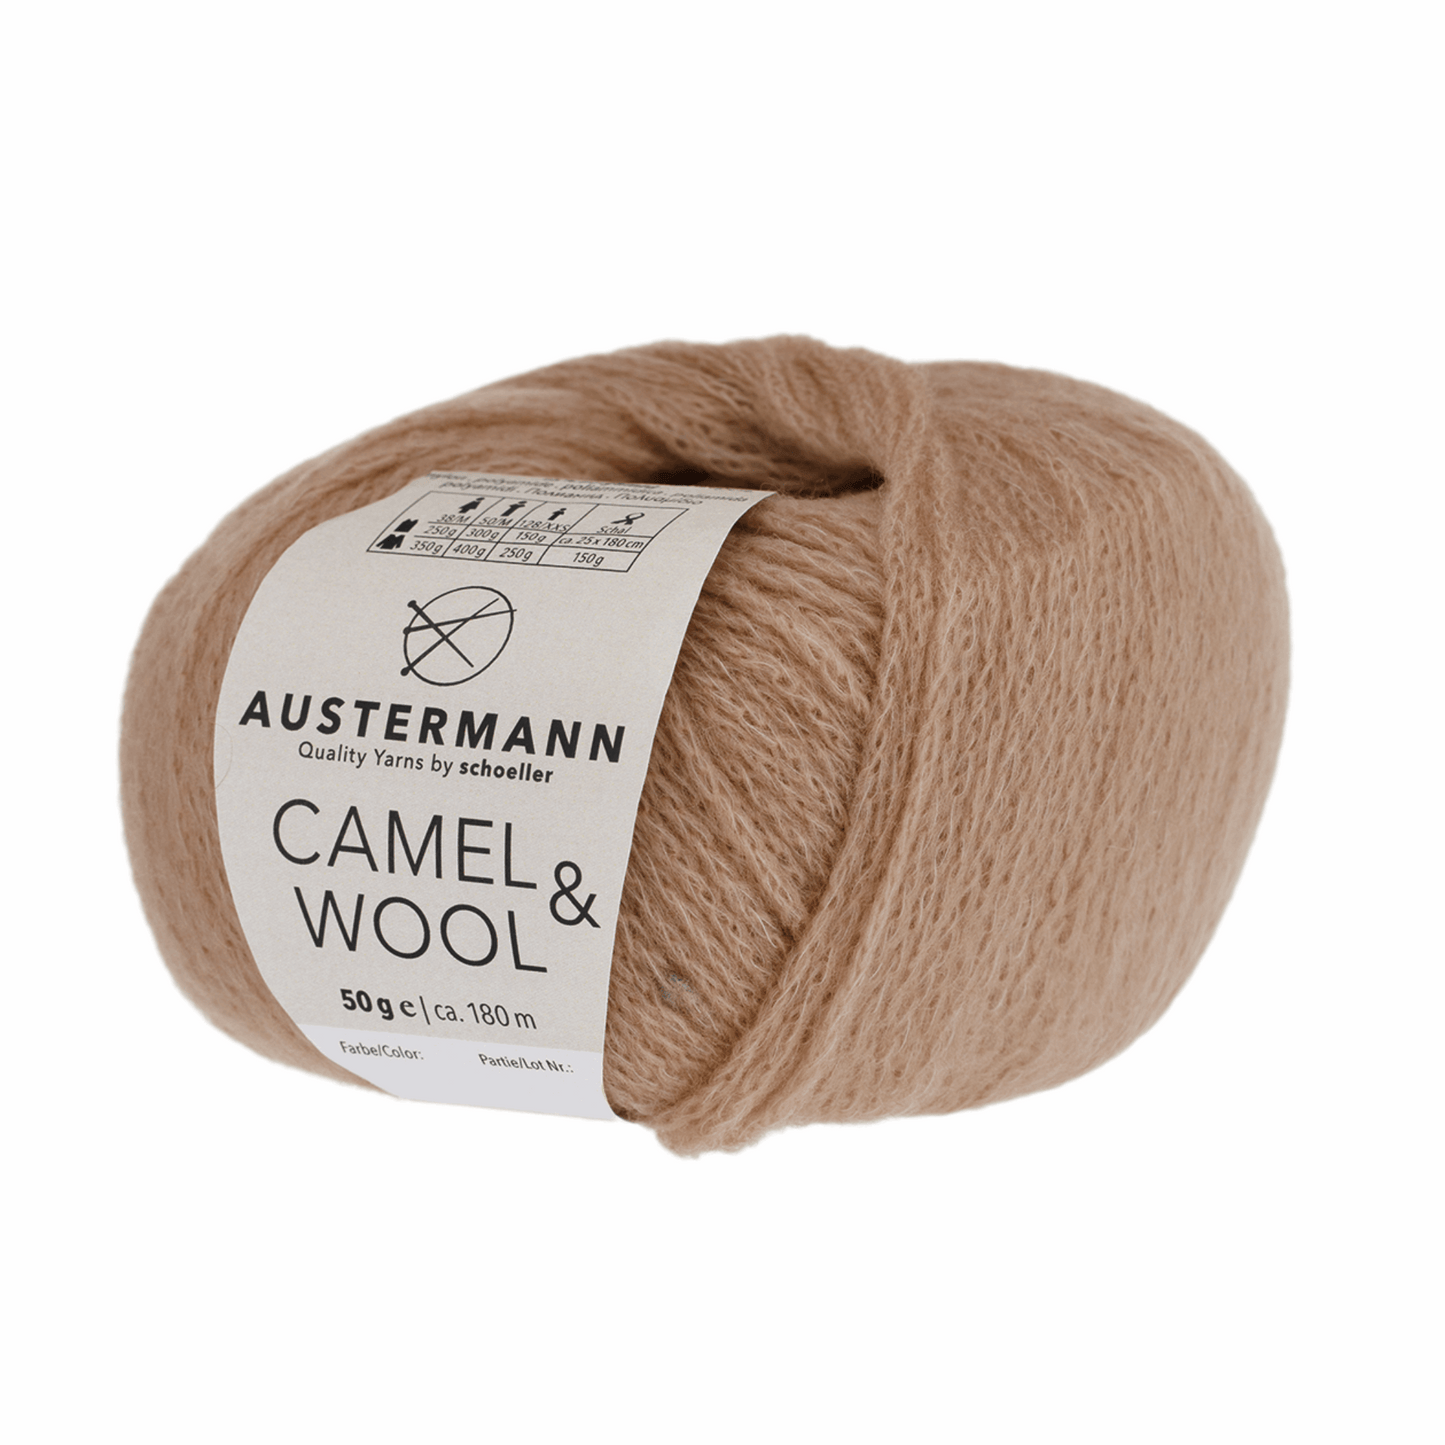 Cameliert& Wool 50g, 90343, Farbe 5, camel